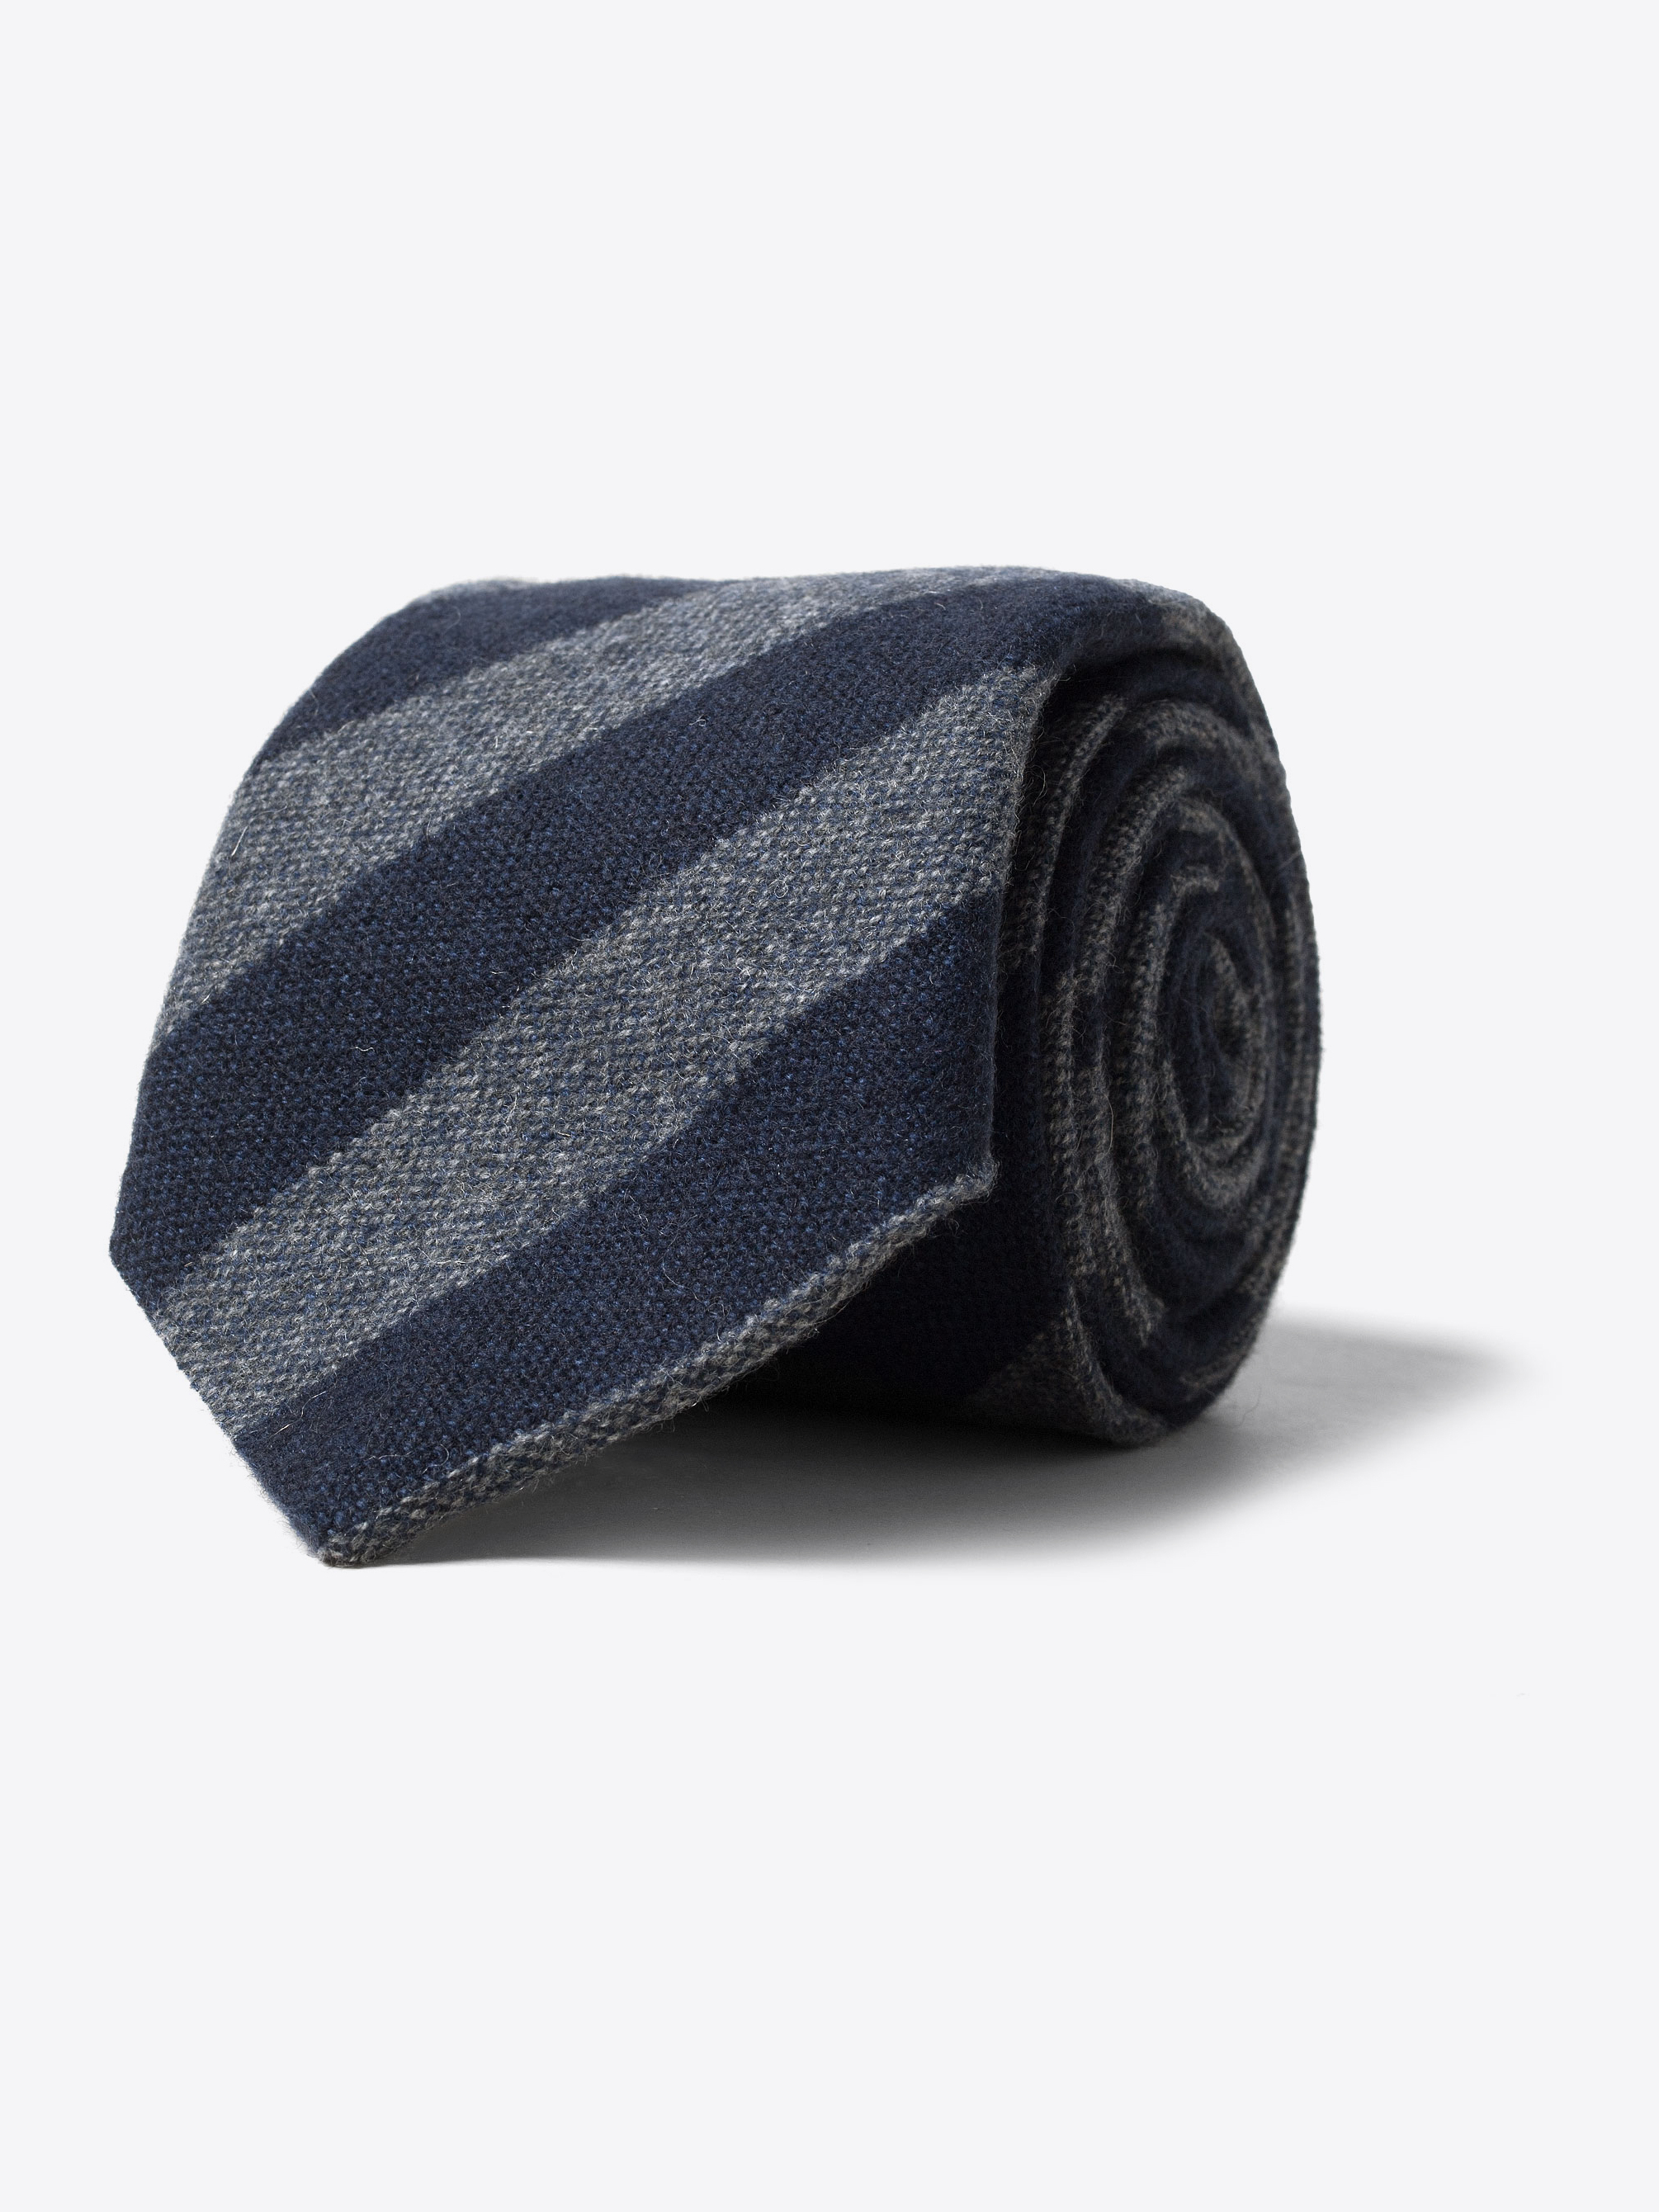 Zoom Image of Grey and Navy Striped Cashmere Tie